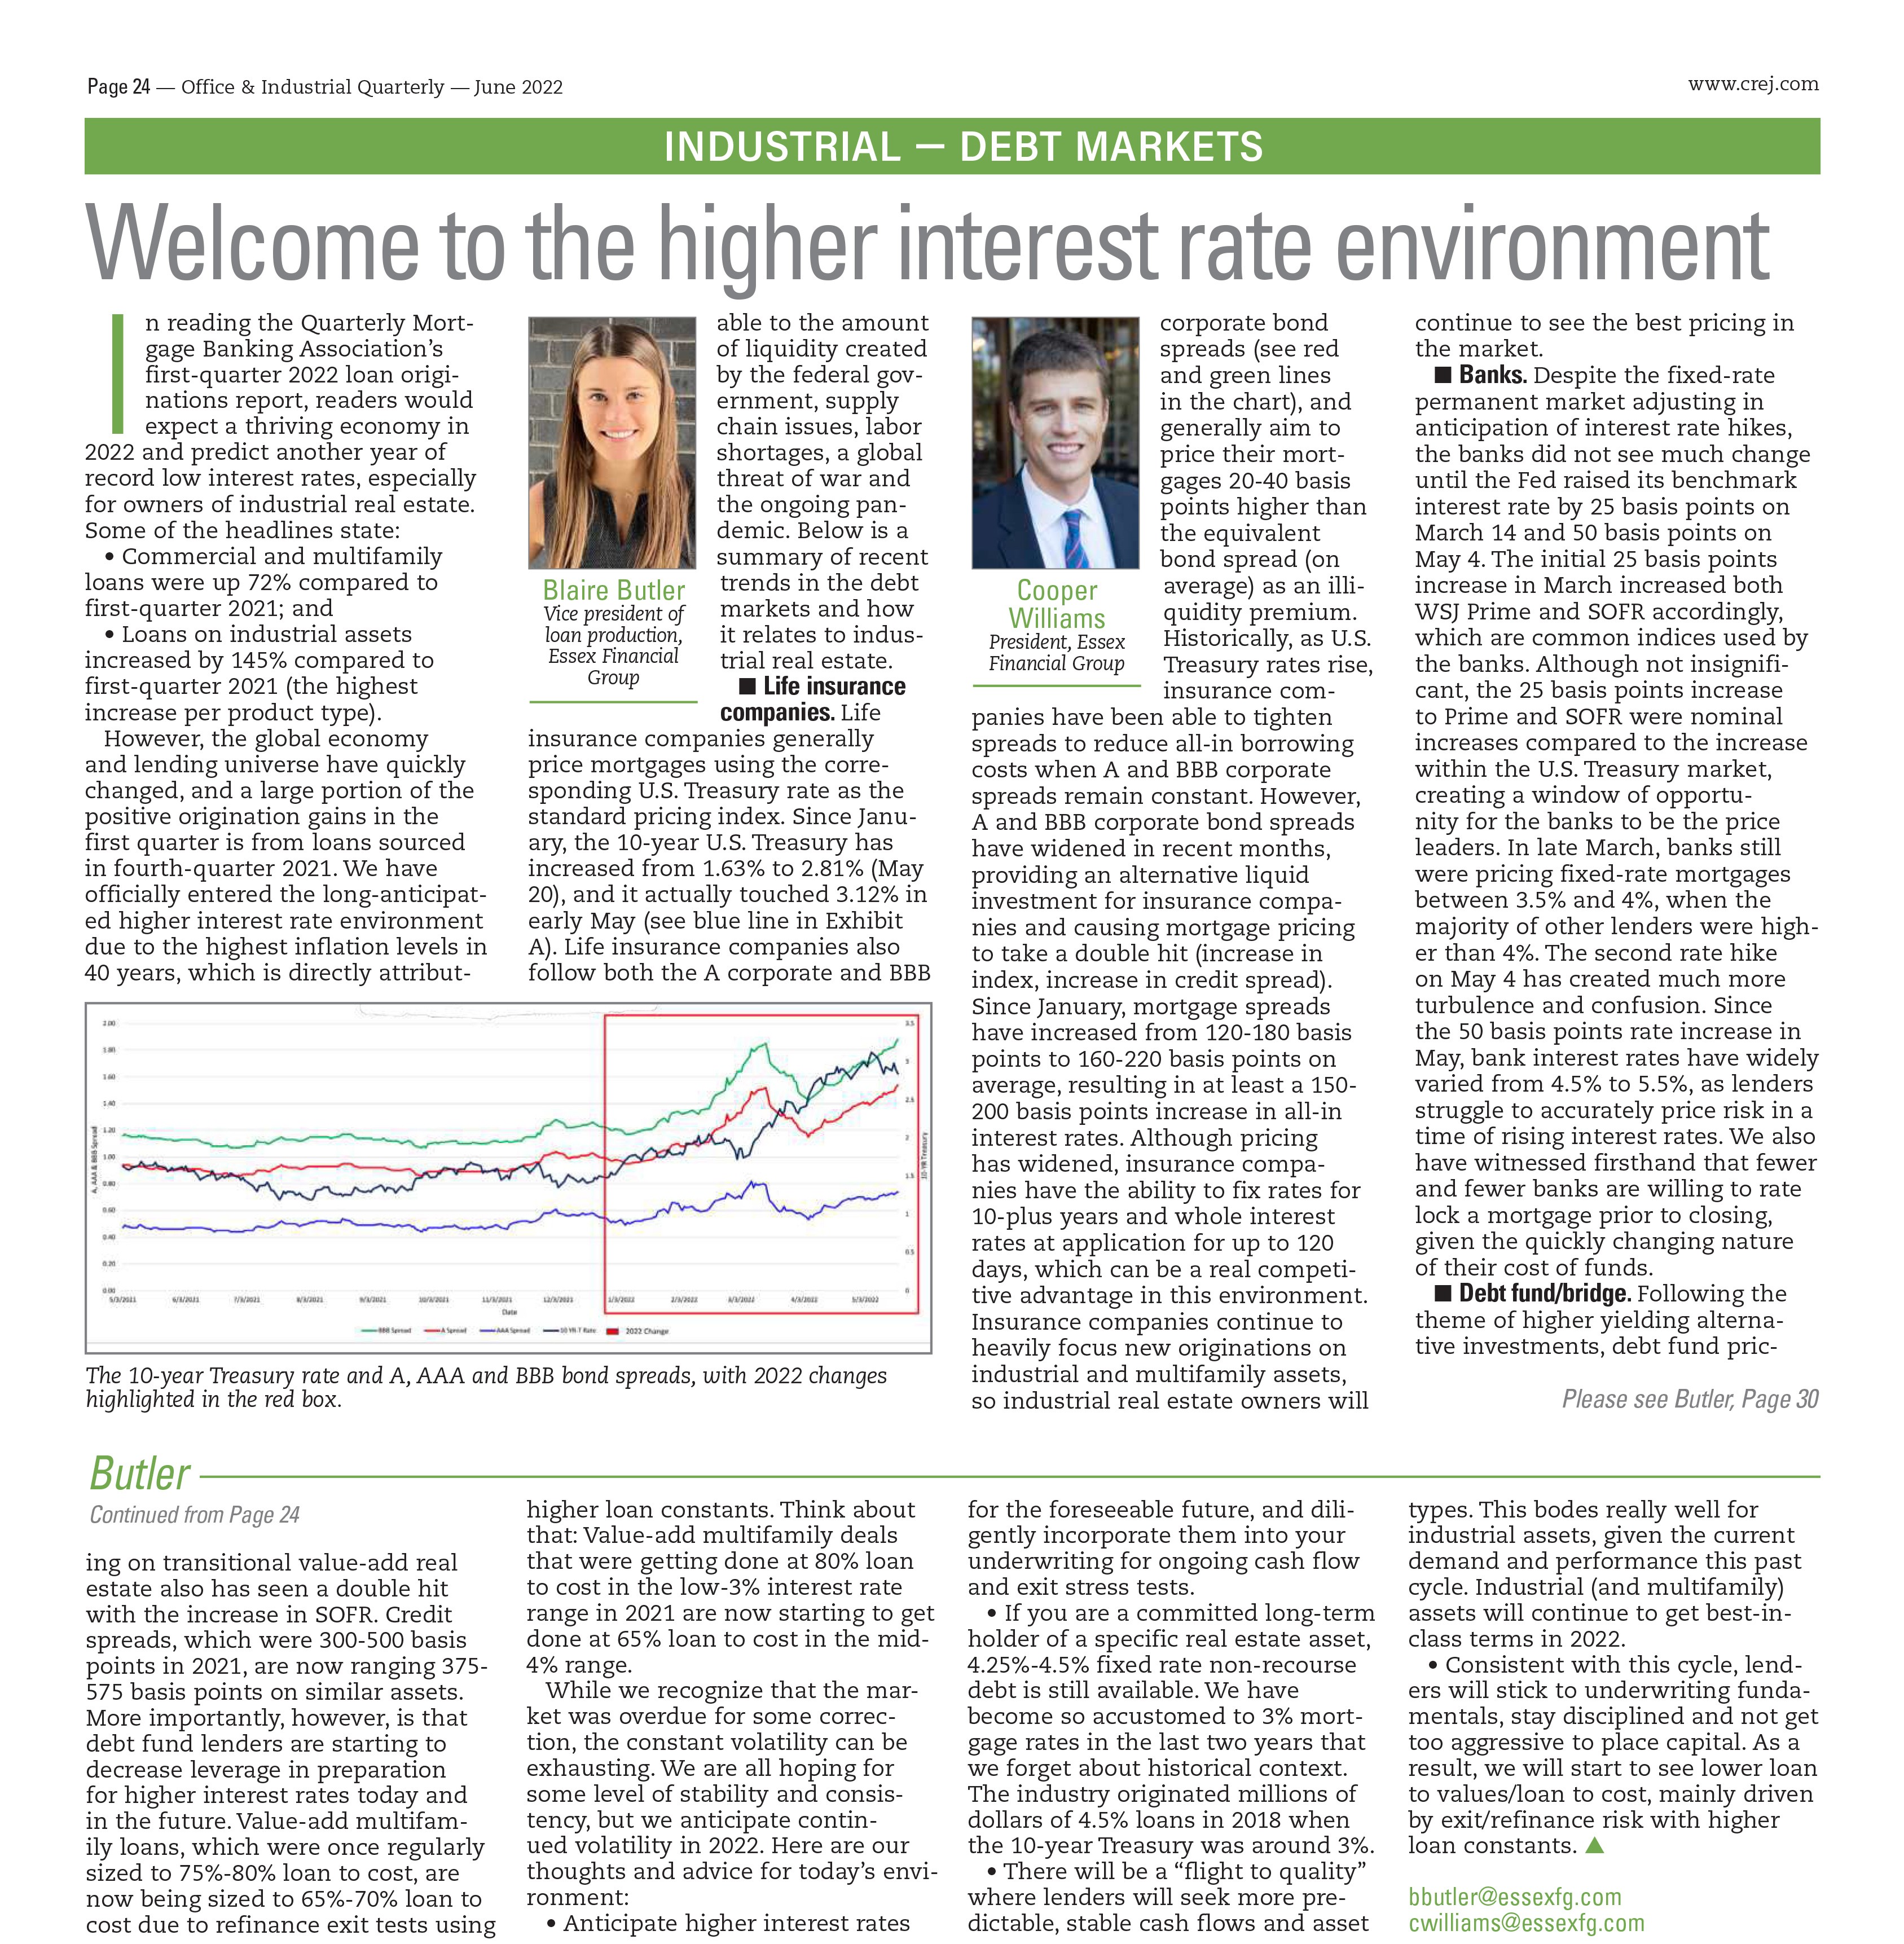 Welcome to the Higher Interest Rate Environment Featured Image